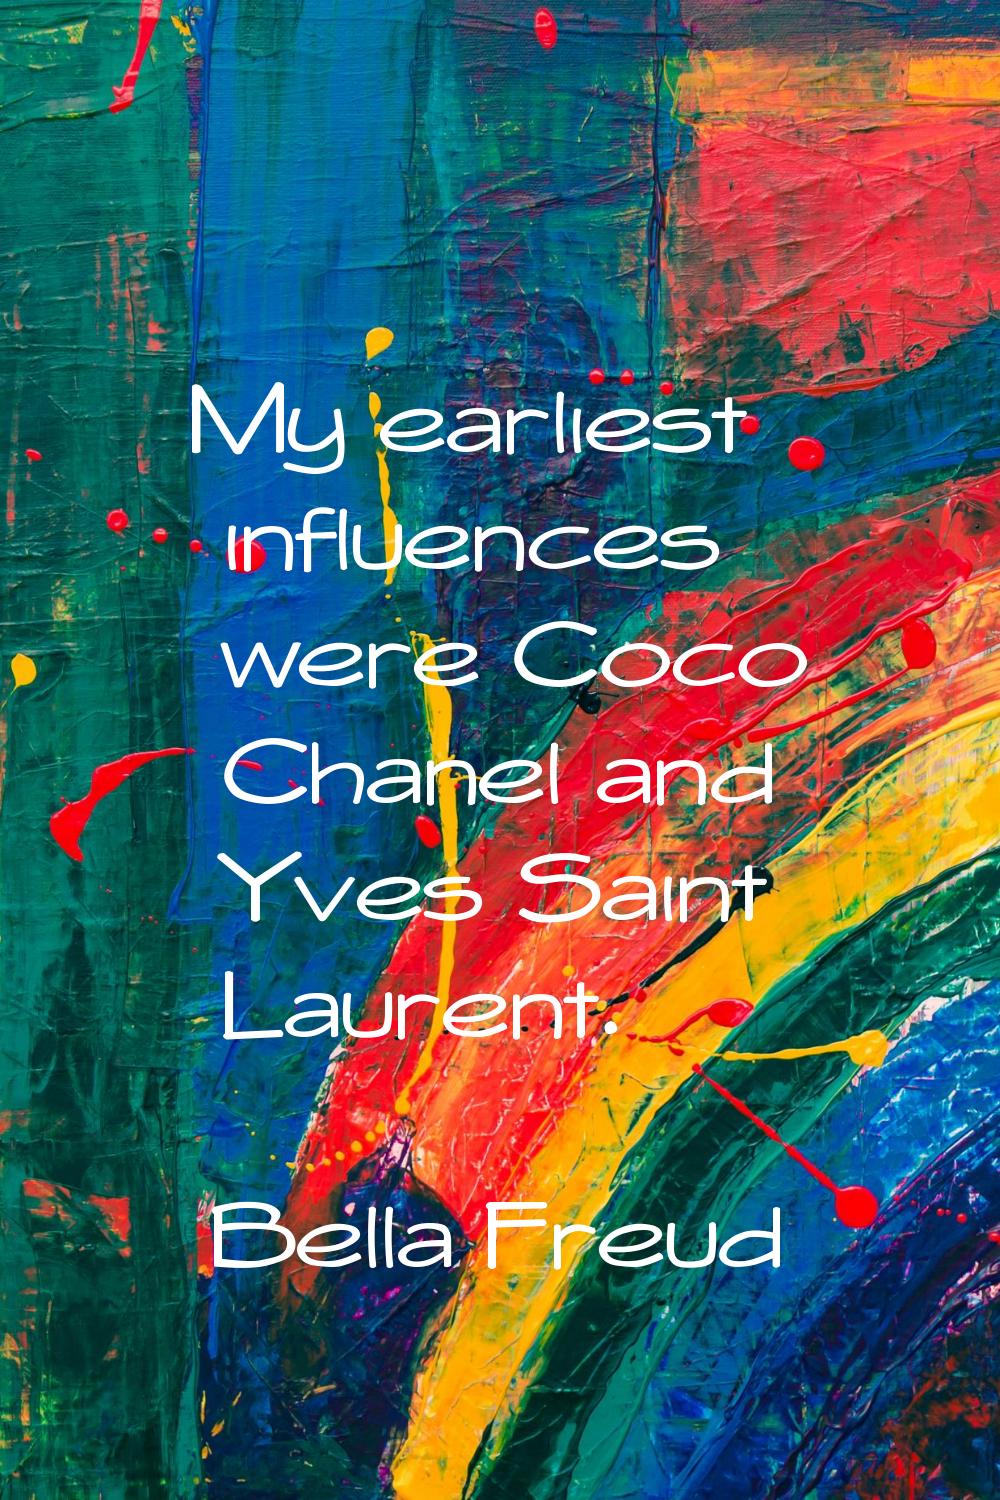 My earliest influences were Coco Chanel and Yves Saint Laurent.